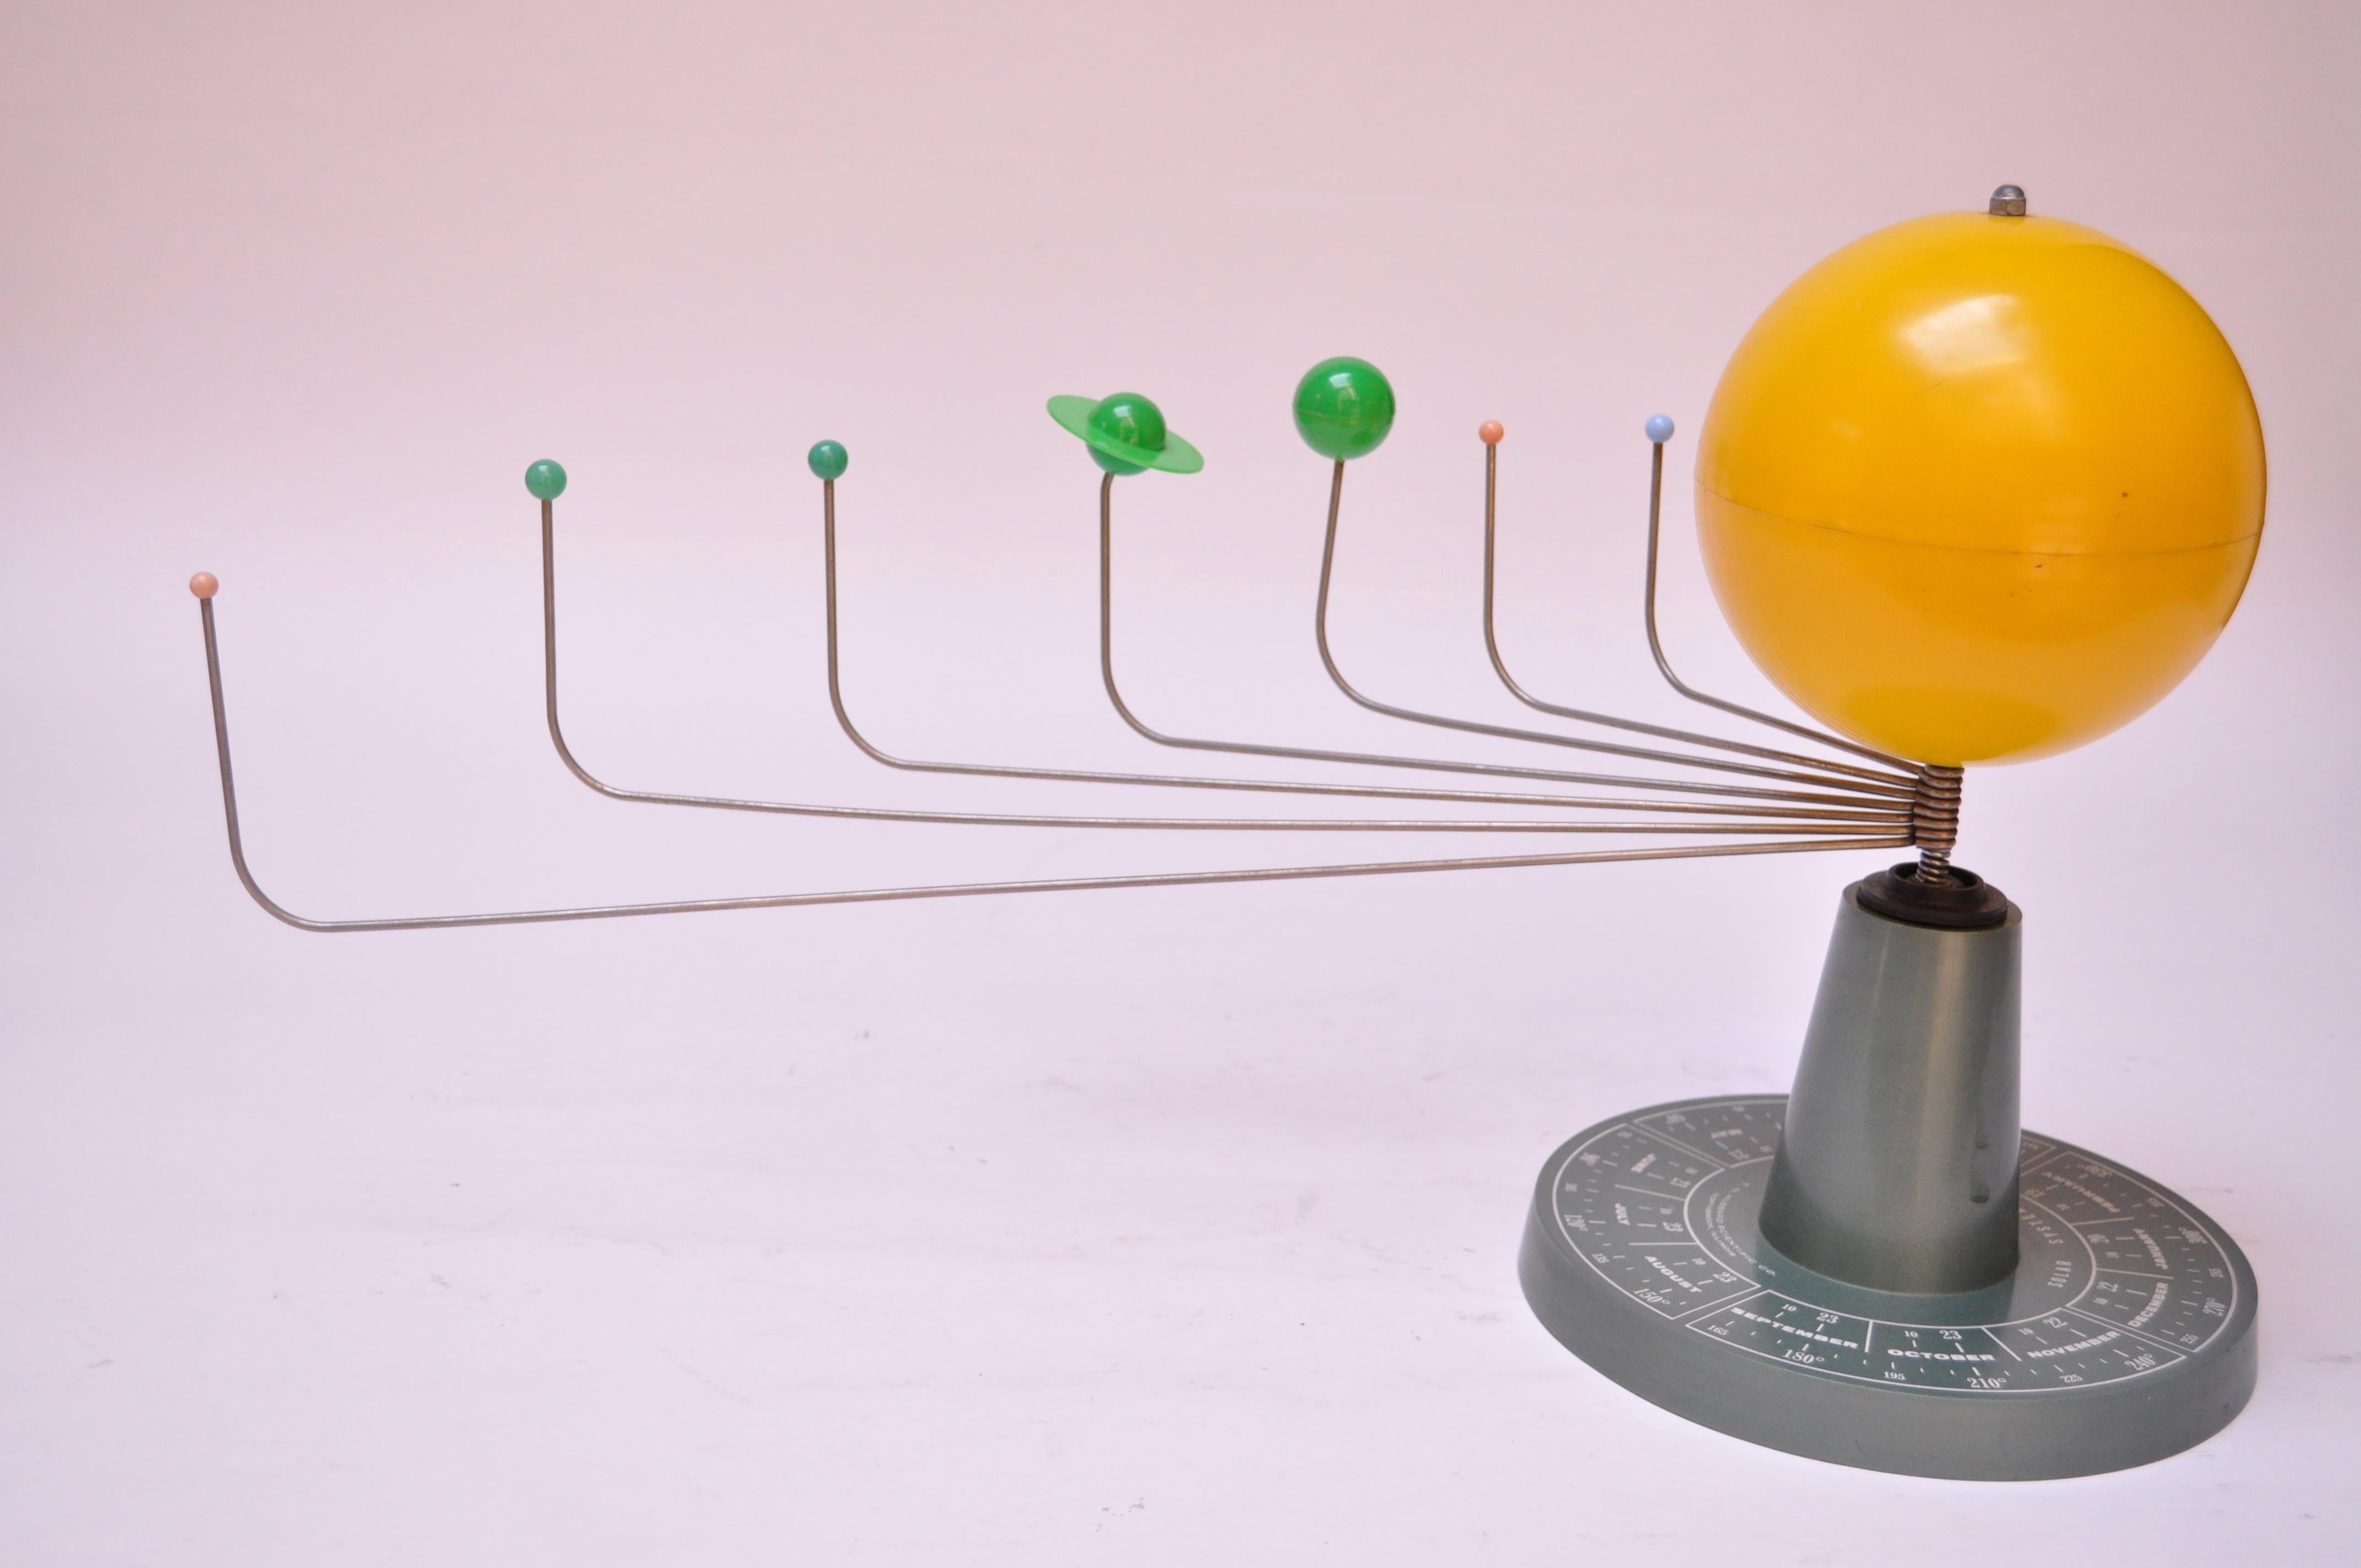 T.N. Hubbard Scientific Co. model solar system / trippensee (circa 1960s Northbrook, IL. USA) which illustrates the relative position between individual planets and the sun according to specific months. Fantastic modernist aesthetic with vibrant